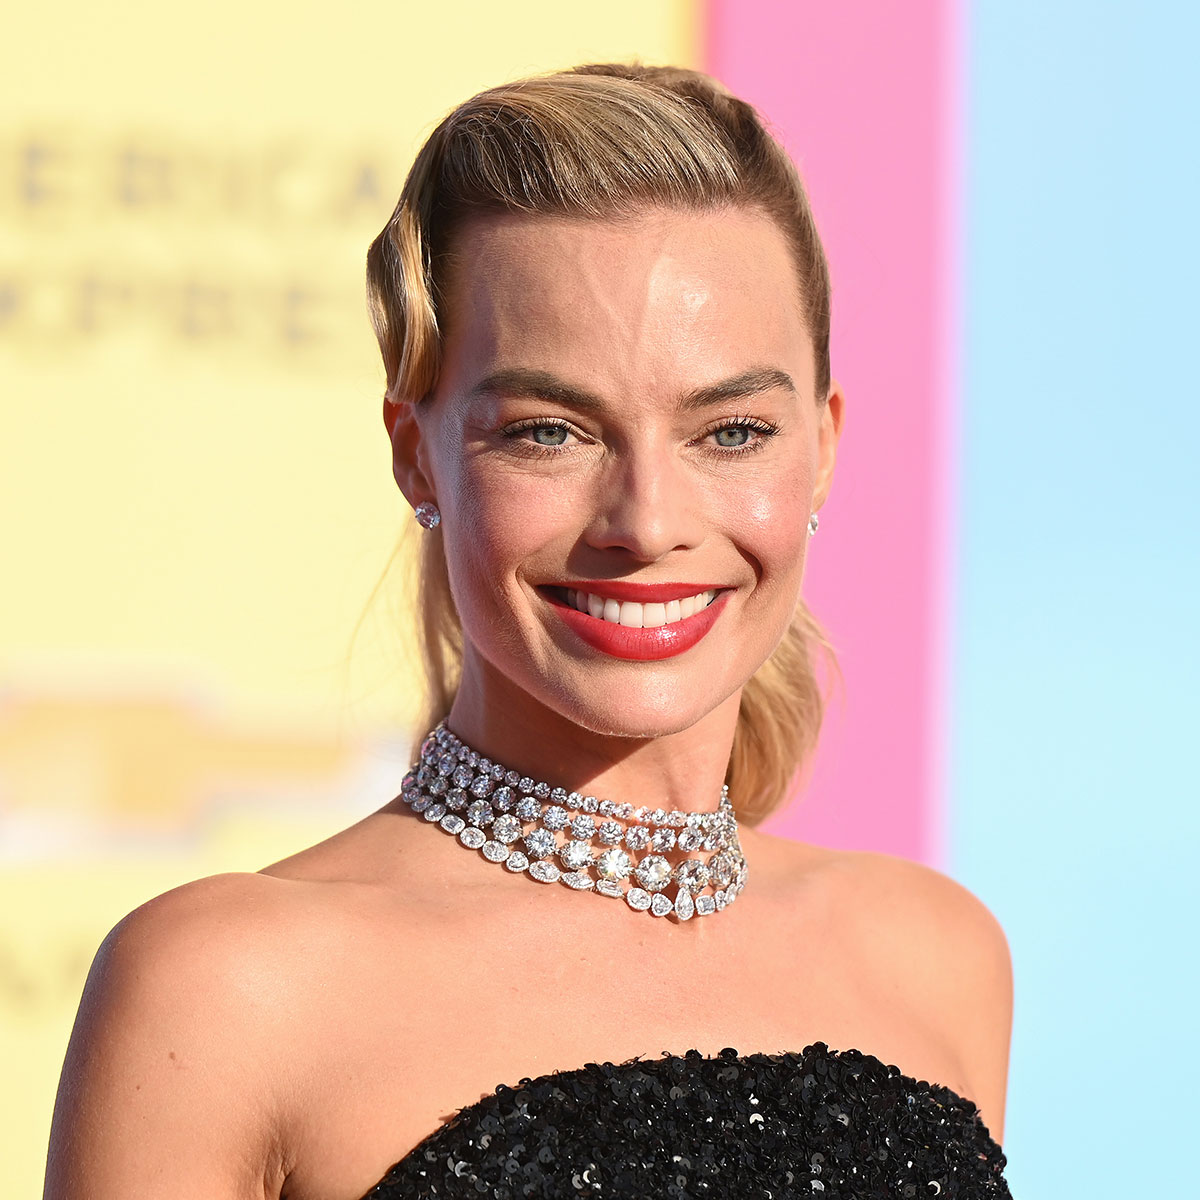 People Can't Stop Photoshopping Margot Robbie's Face Onto